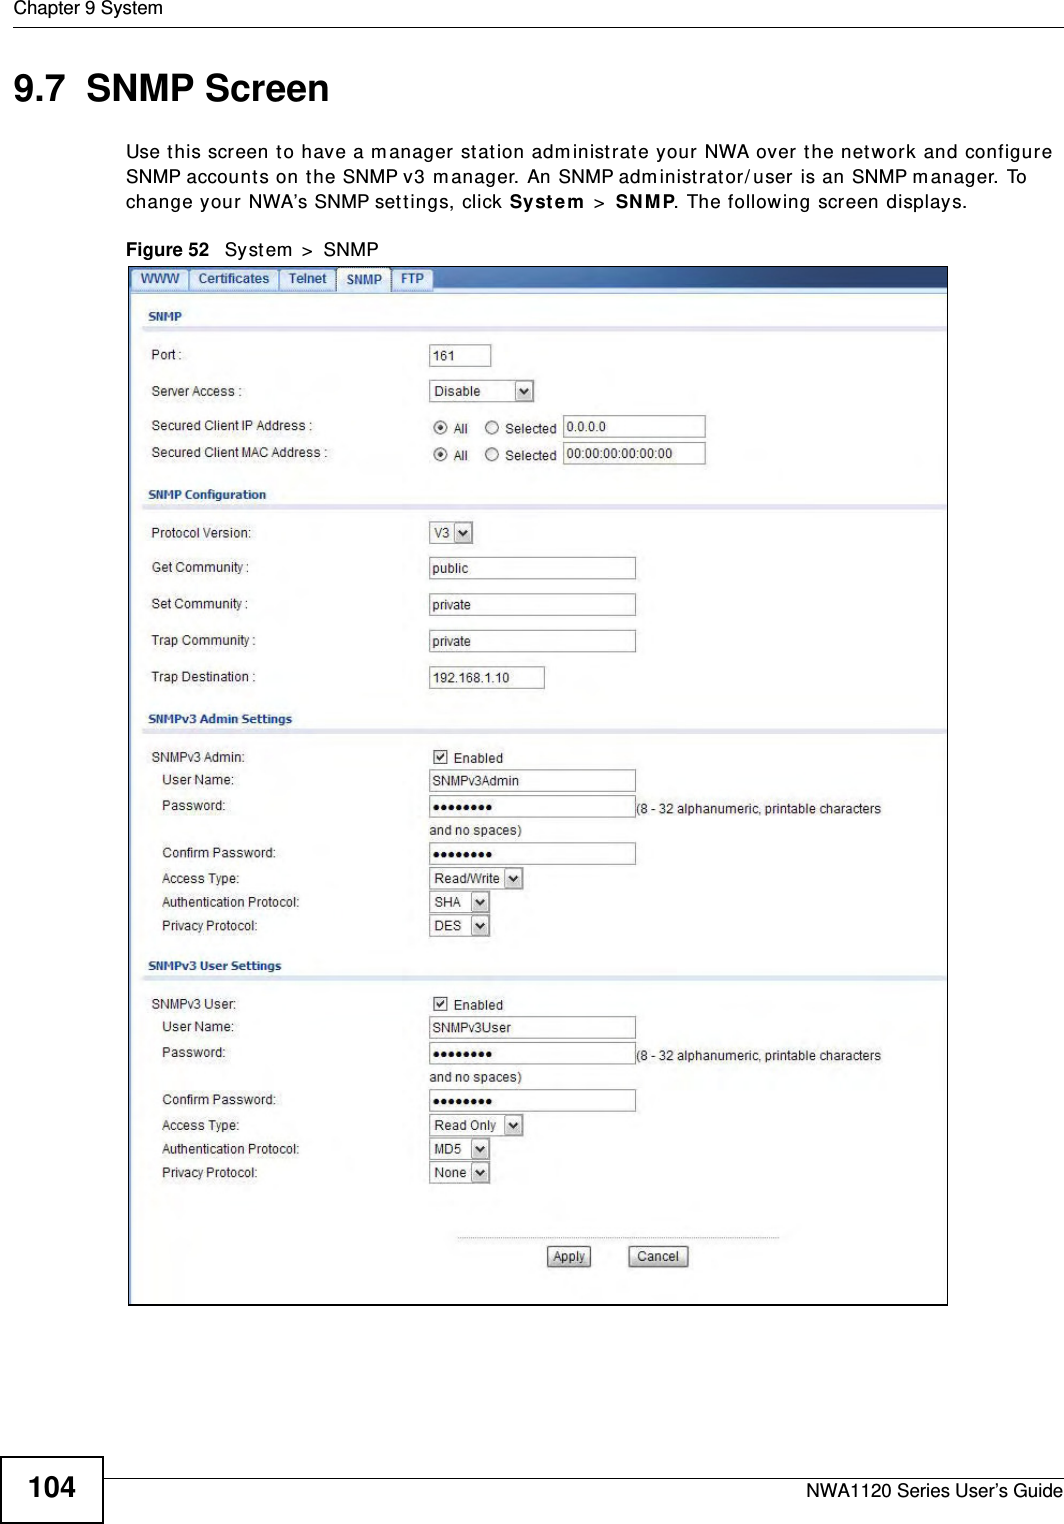 Chapter 9 SystemNWA1120 Series User’s Guide1049.7  SNMP ScreenUse this screen to have a manager station administrate your NWA over the network and configure SNMP accounts on the SNMP v3 manager. An SNMP administrator/user is an SNMP manager. To change your NWA’s SNMP settings, click System &gt; SNMP. The following screen displays.Figure 52   System &gt; SNMP